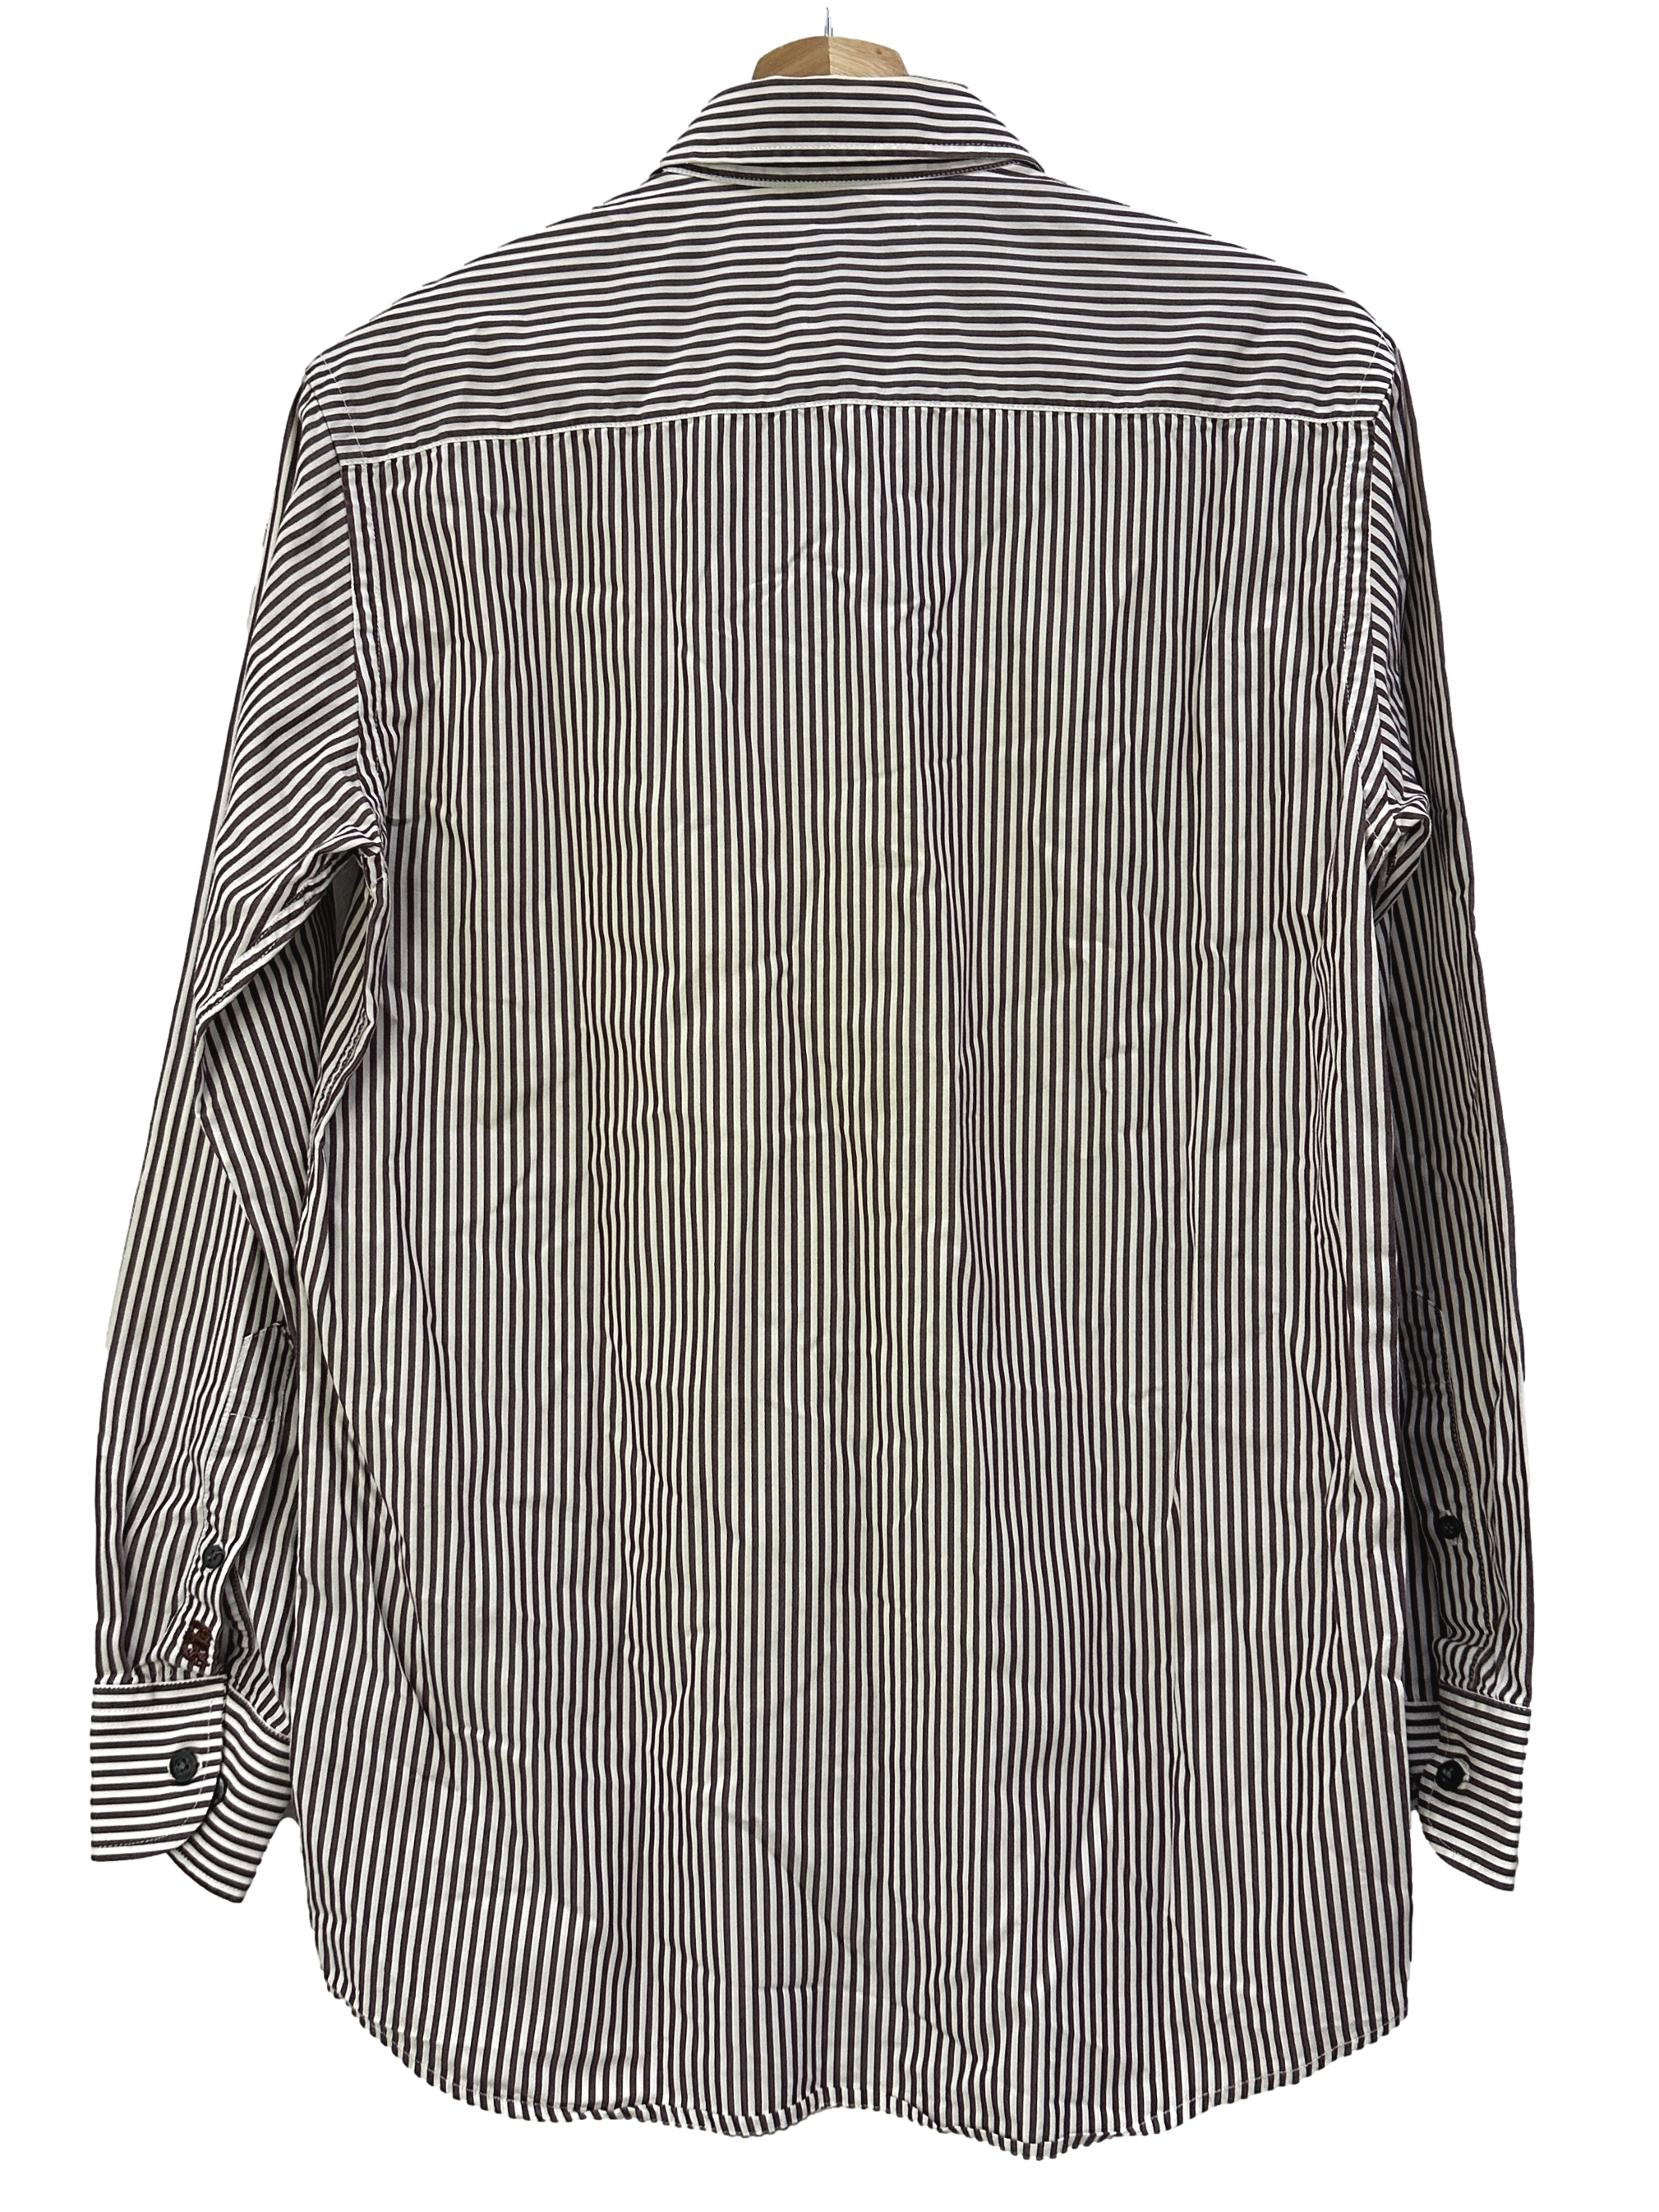 Brown & White Striped Semi Fit Button Up Shirt